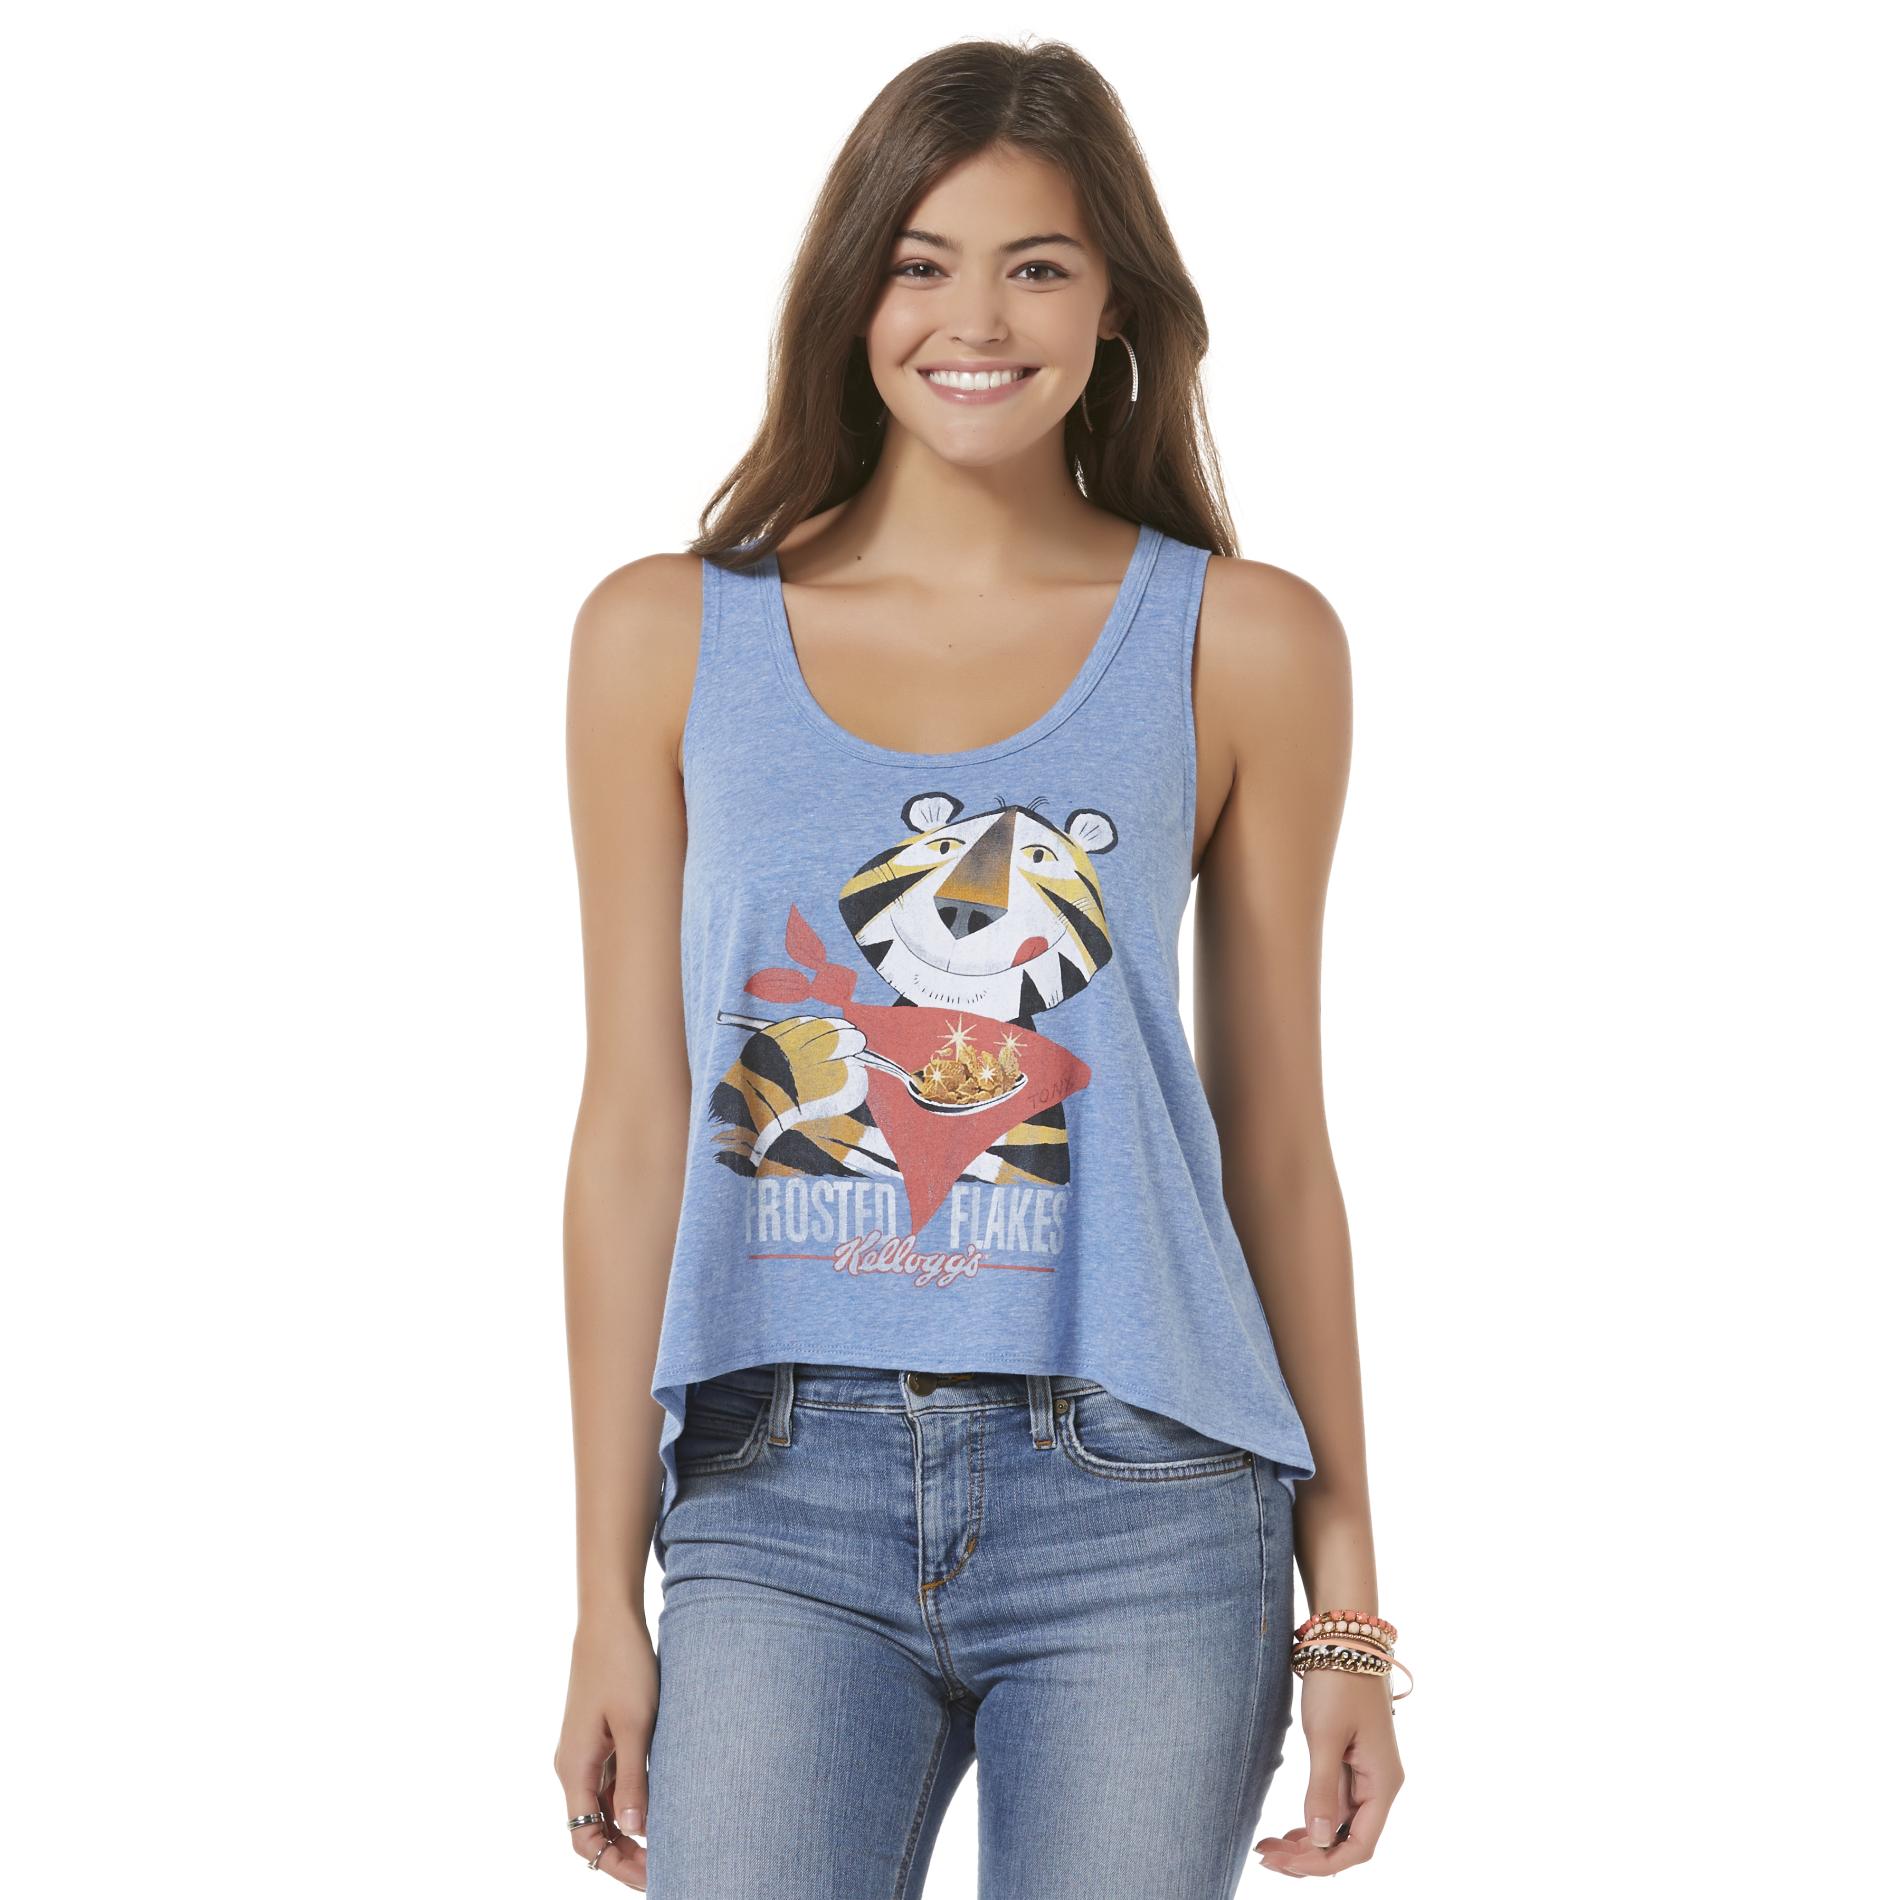 Frosted Flakes Junior's Sleeveless Top - Tony the Tiger